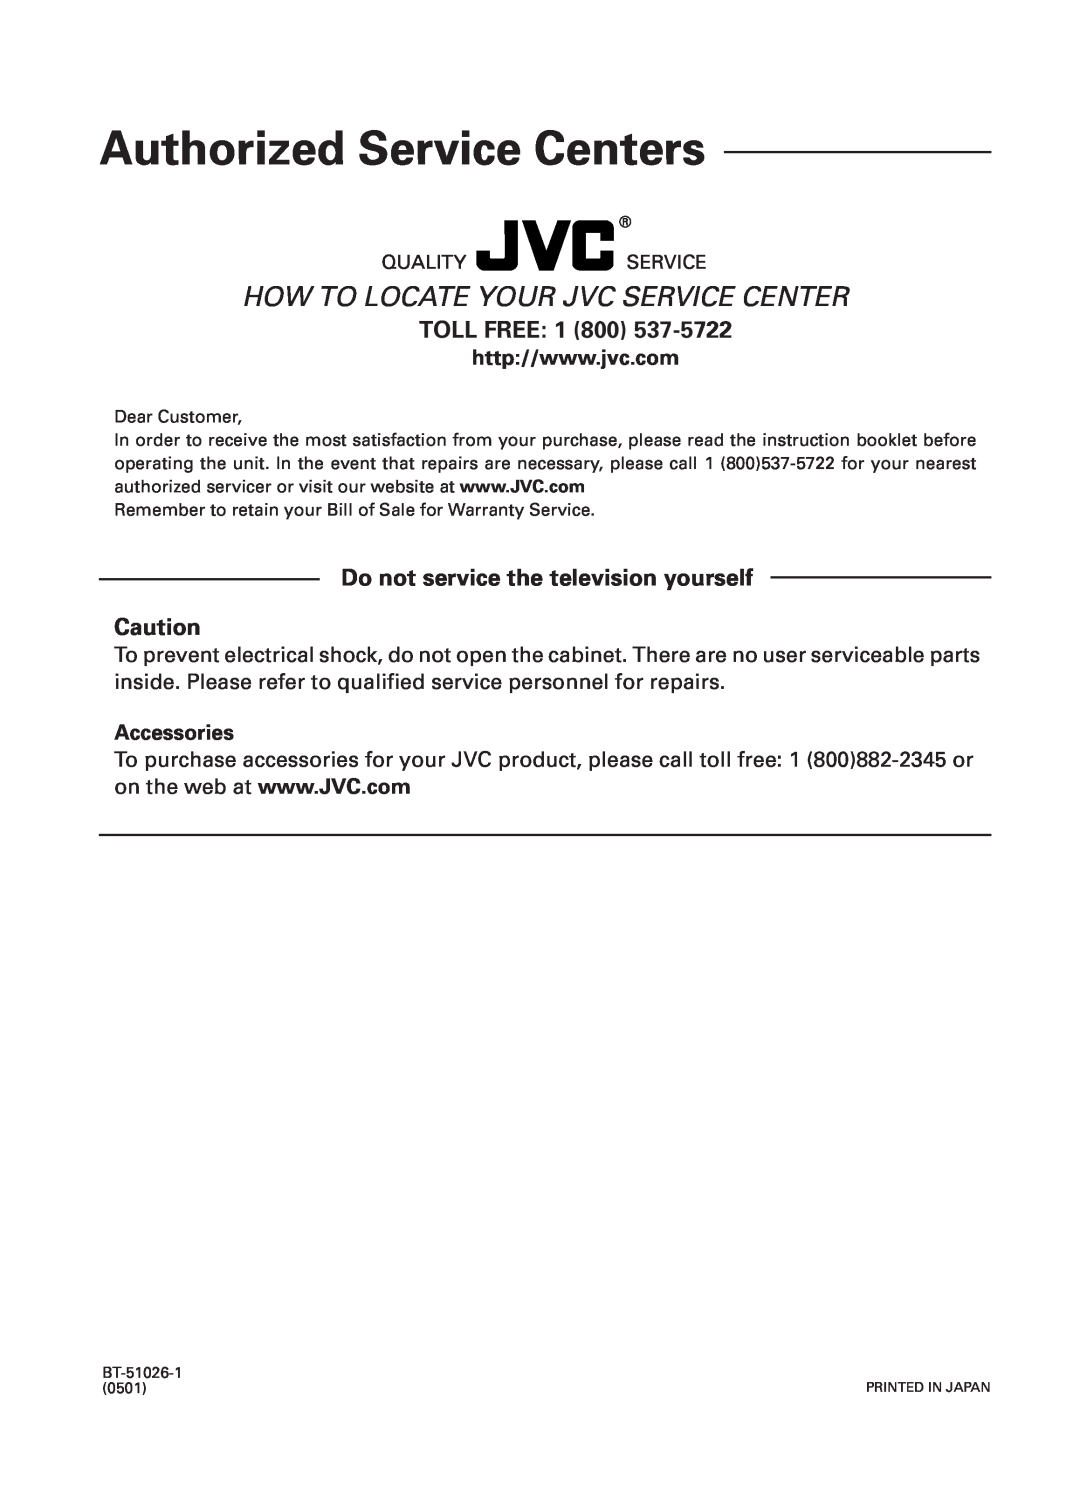 JVC RC-BM5 manual Toll Free, Do not service the television yourself, Authorized Service Centers, Accessories 